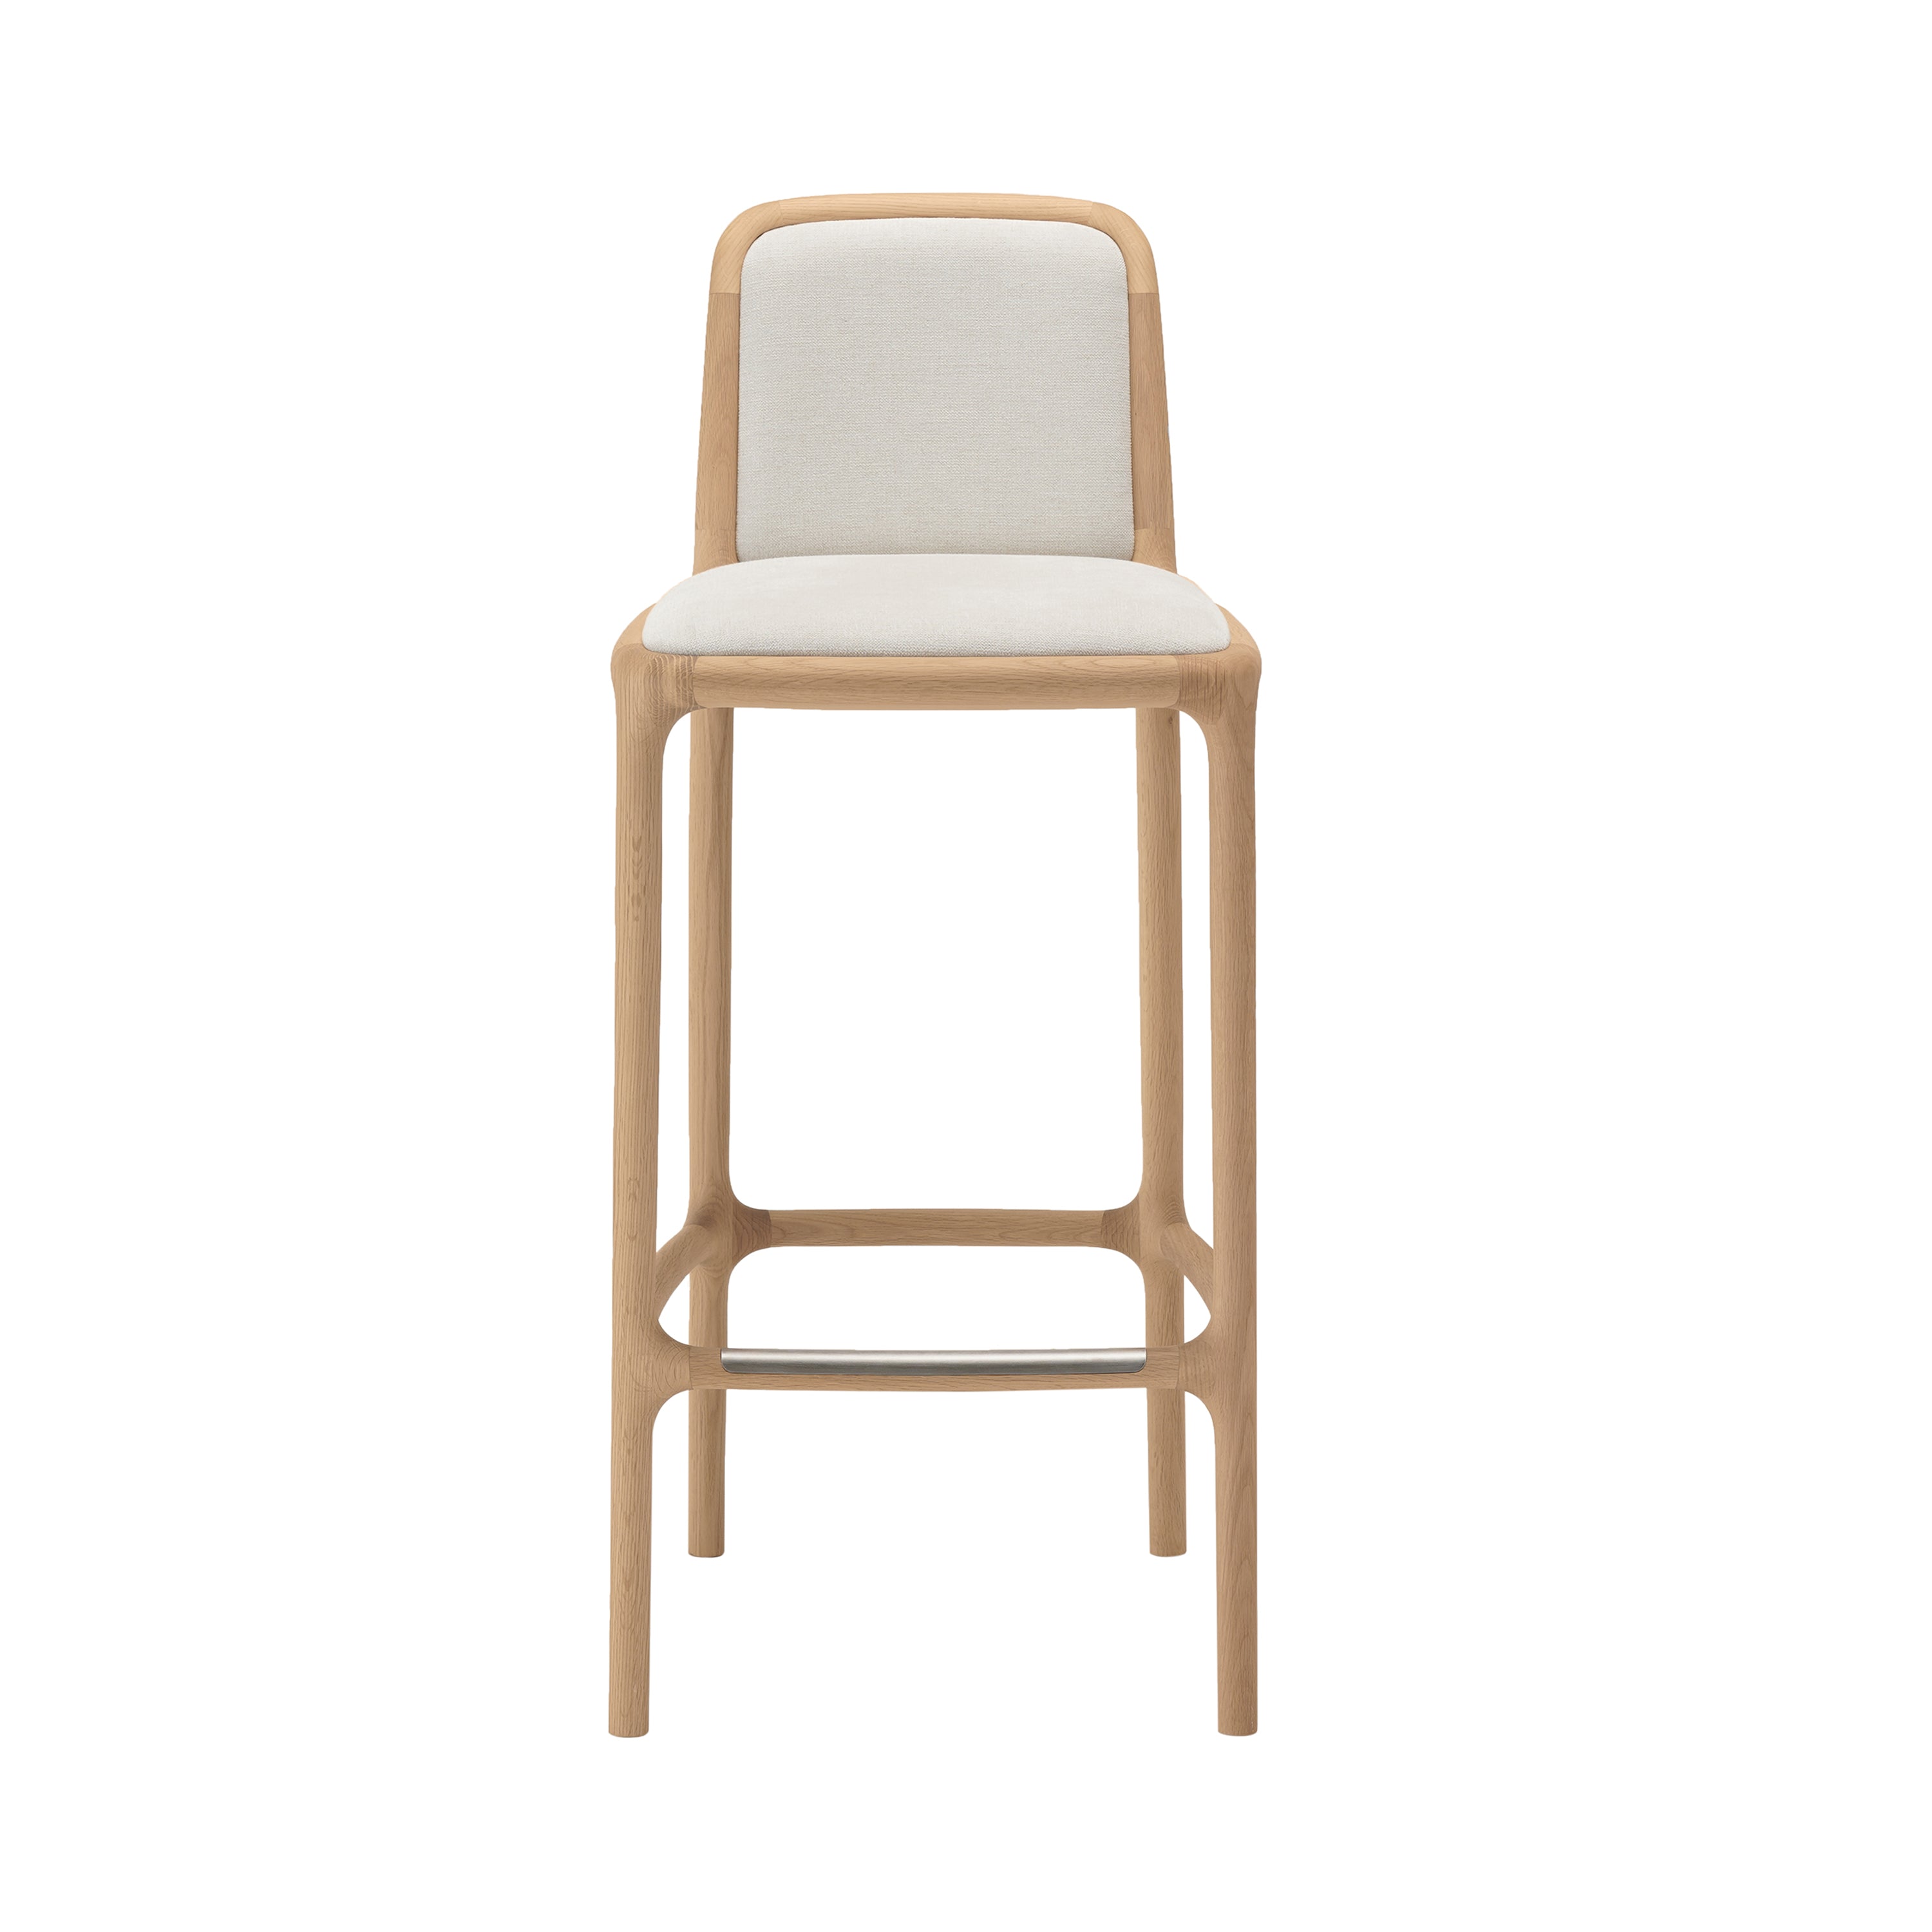 Norman Foster Stool NF-BS02: Pure Oak